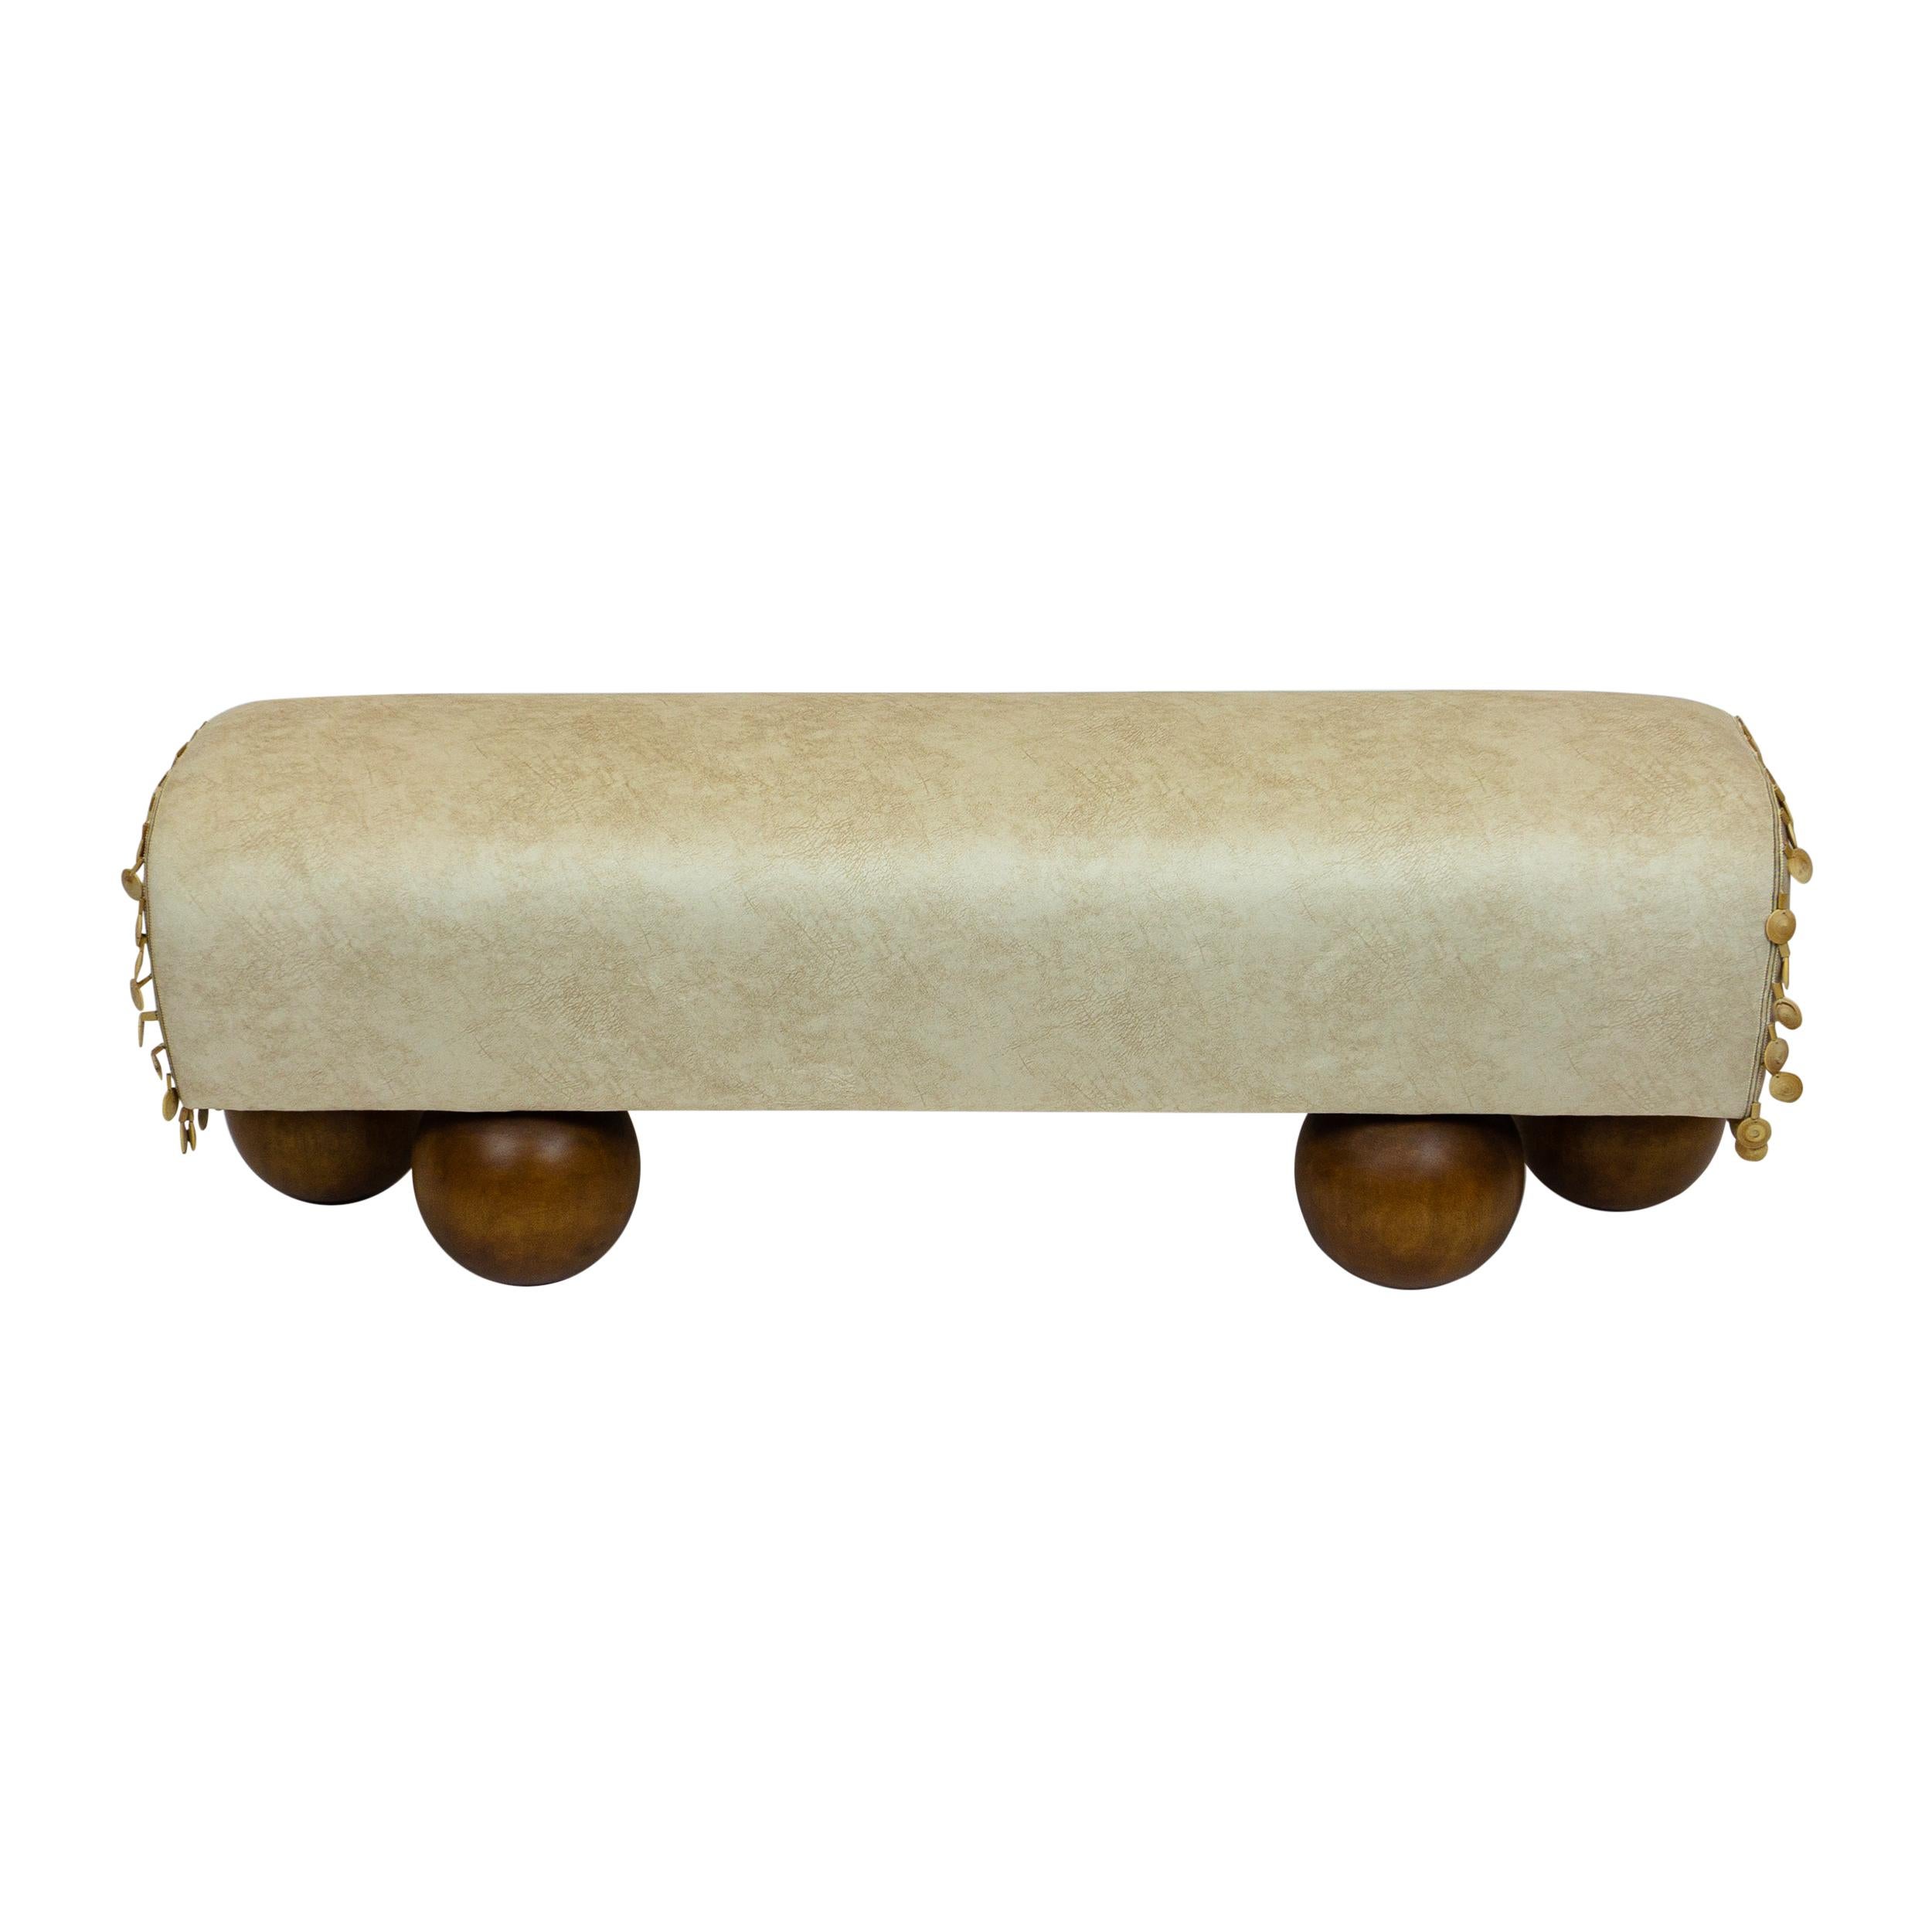 American Walnut Ball Foot Bench with Saddle Shaped Seat - Customizable